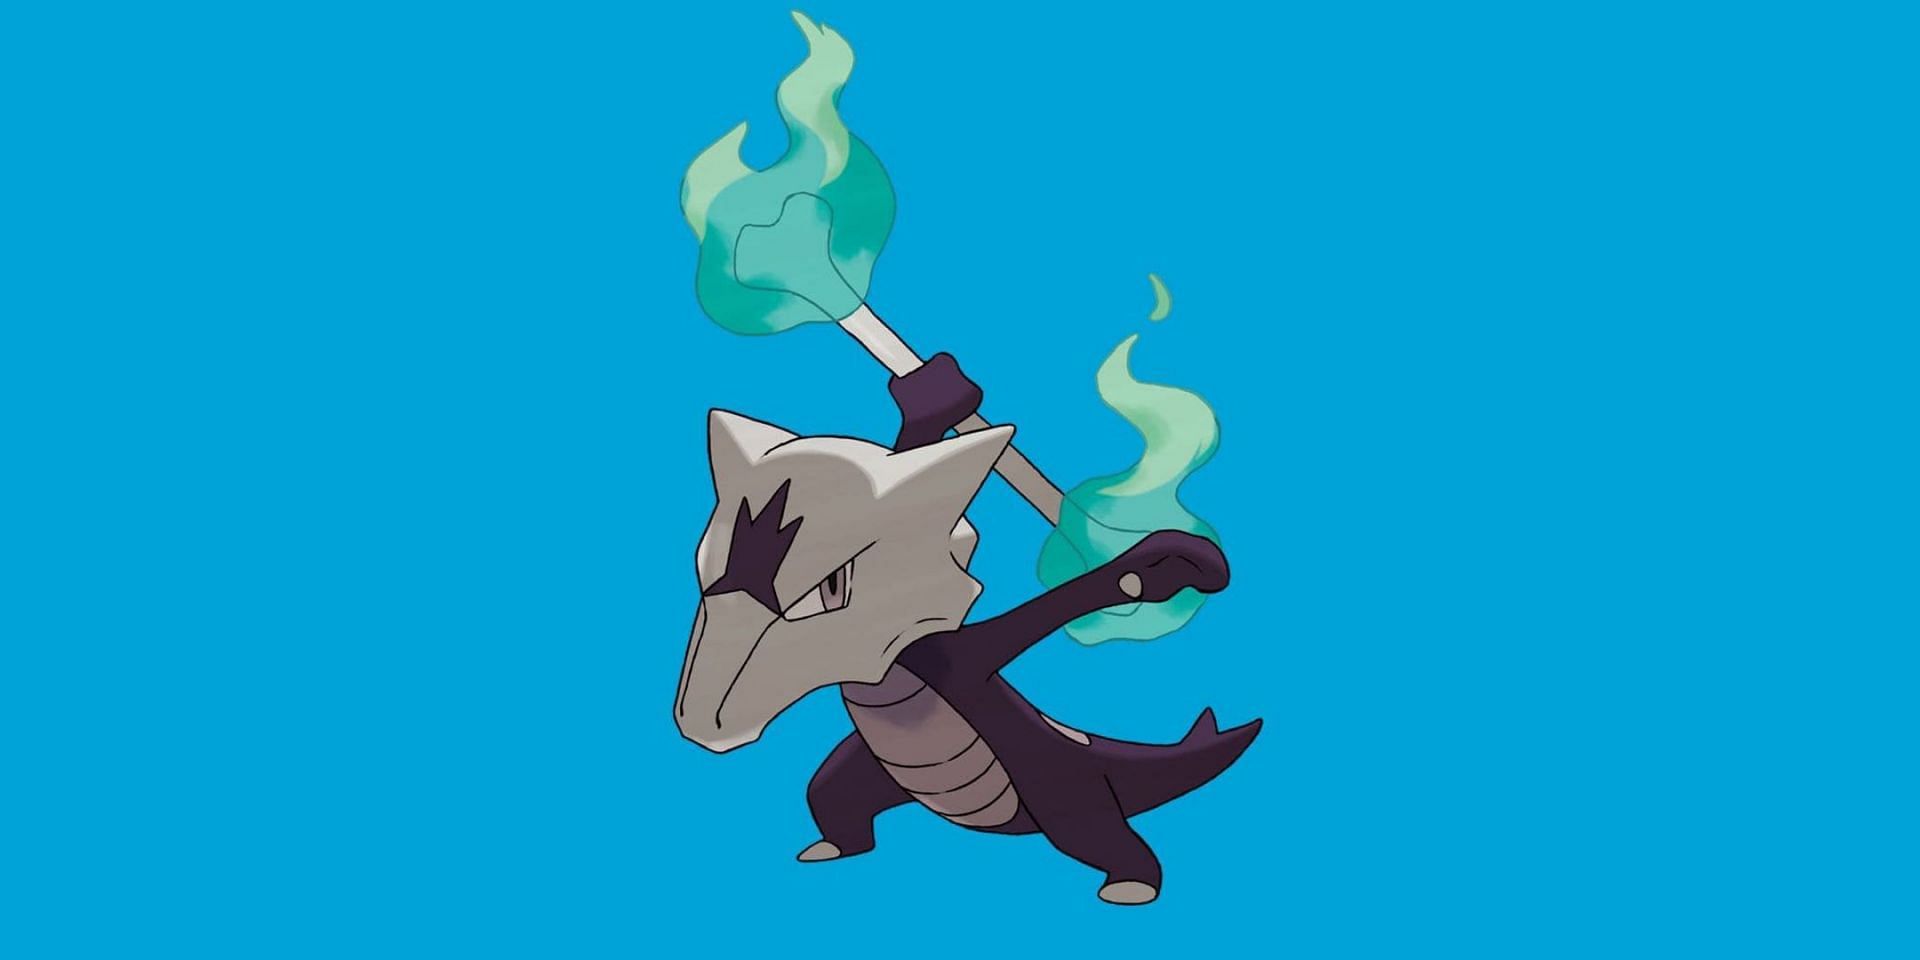 &quot;When it beats opponents with its bone, the cursed flames spread to them. No amount of water will stop those flames from burning.&quot; - an excerpt from Alolan Marowak&#039;s Pokedex entry (Image via The Pokemon Company)